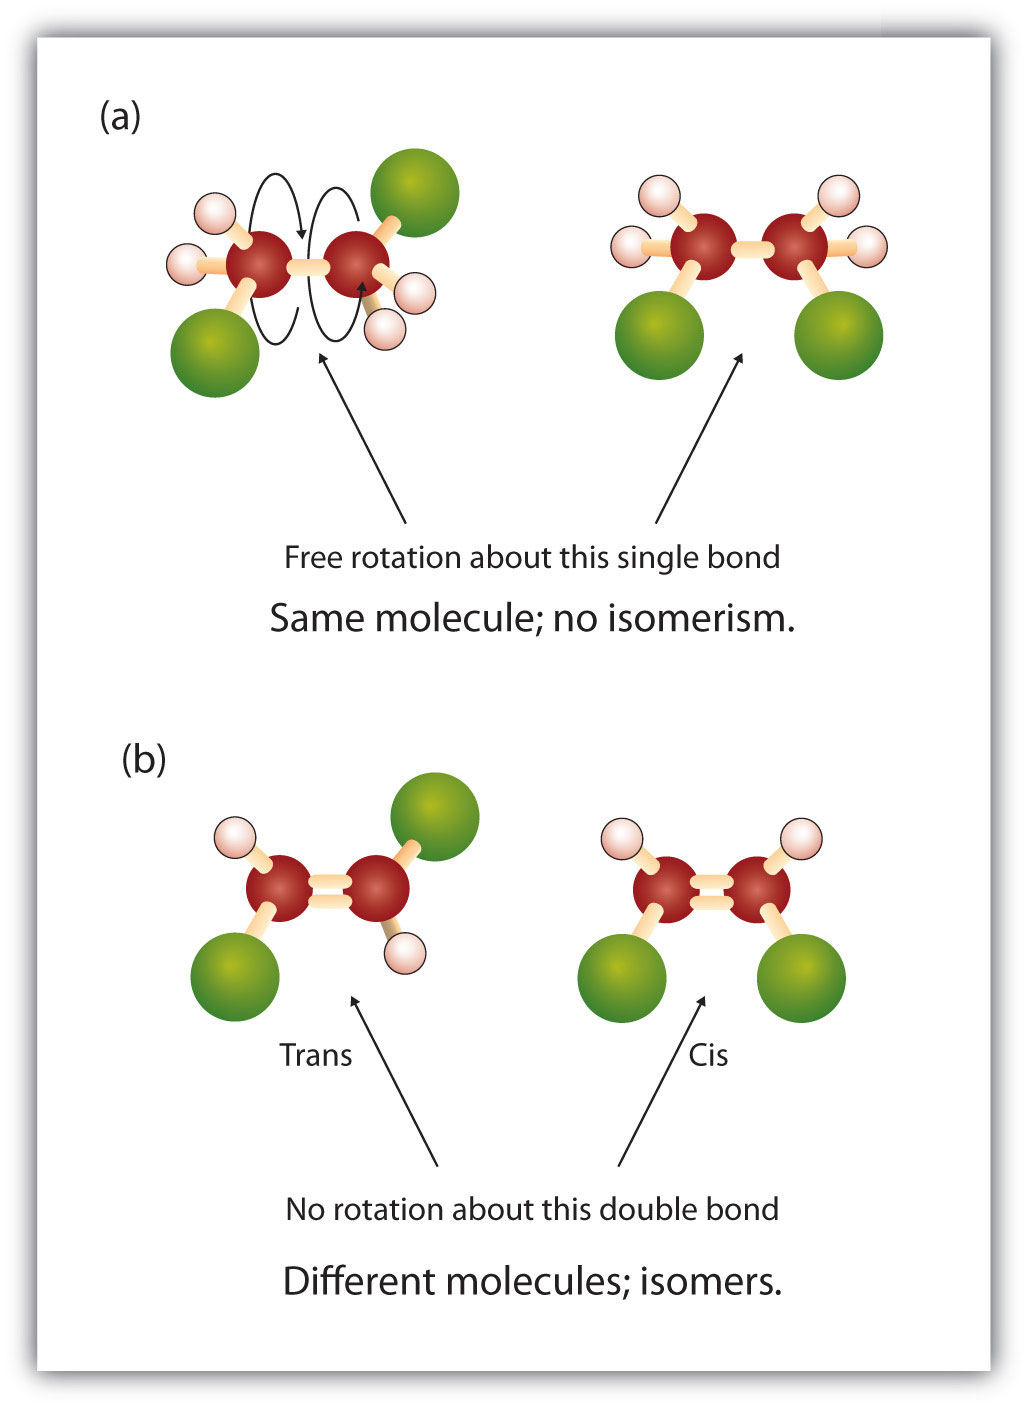 Diagram showing rotation around the axis of the single bond in alkanes, and the lack of similar rotation around the axis of the double bond in alkenes. For alkanes, text in the figure reads: Free rotation about the single bond, same molecule; no isomerism. For alkenes, text in the figure says: No rotation about this double bond, different molecules; isomers.